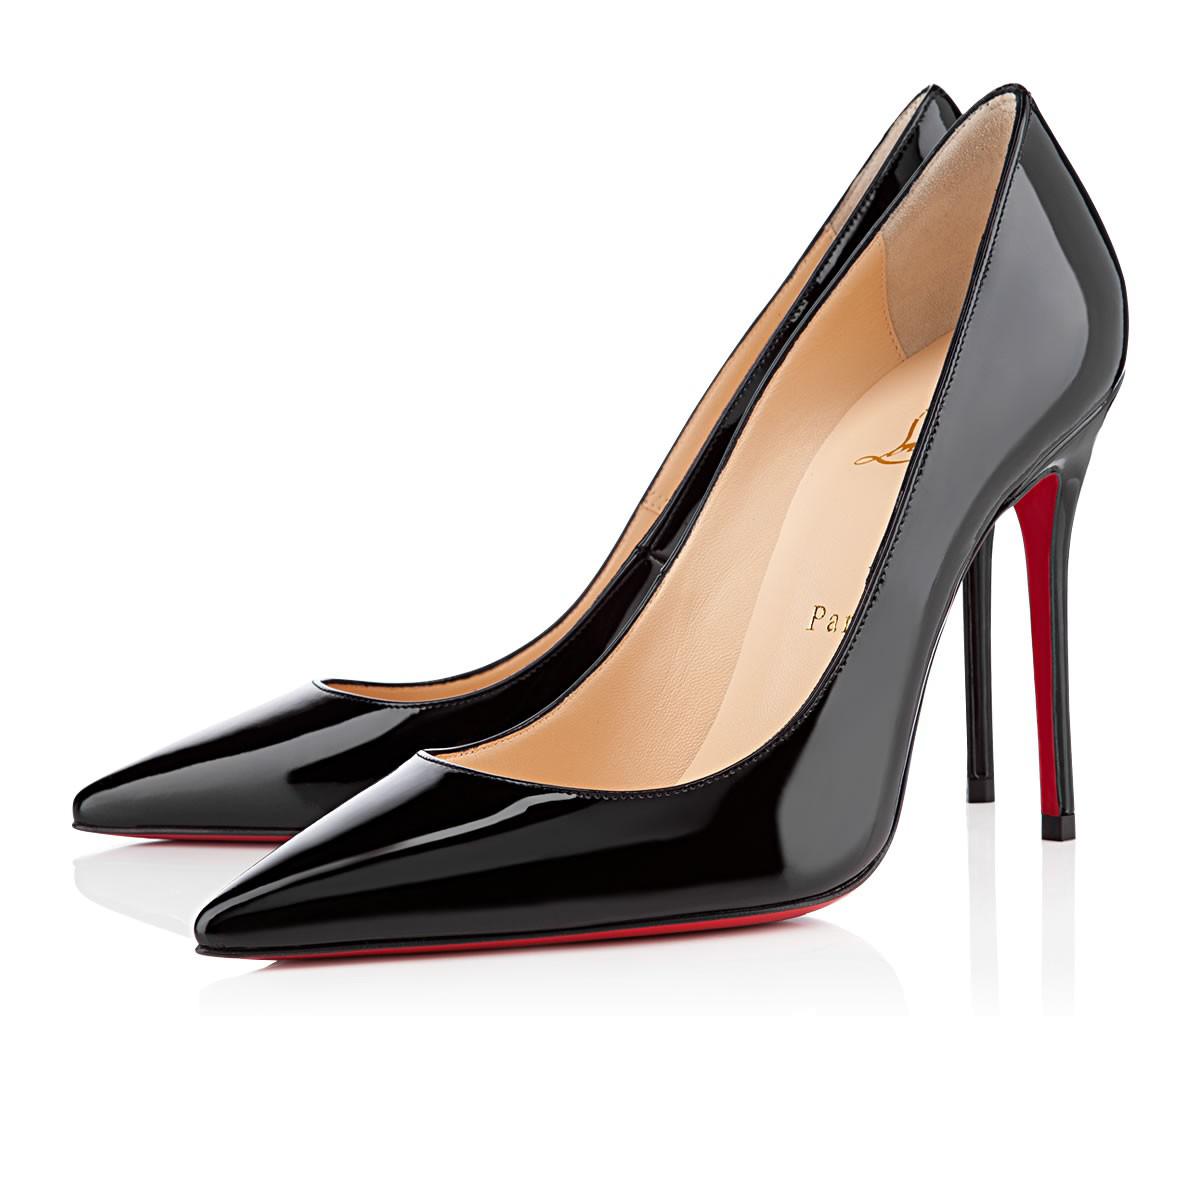 Lyst - Christian Louboutin Decollete Patent leather Pumps in Black